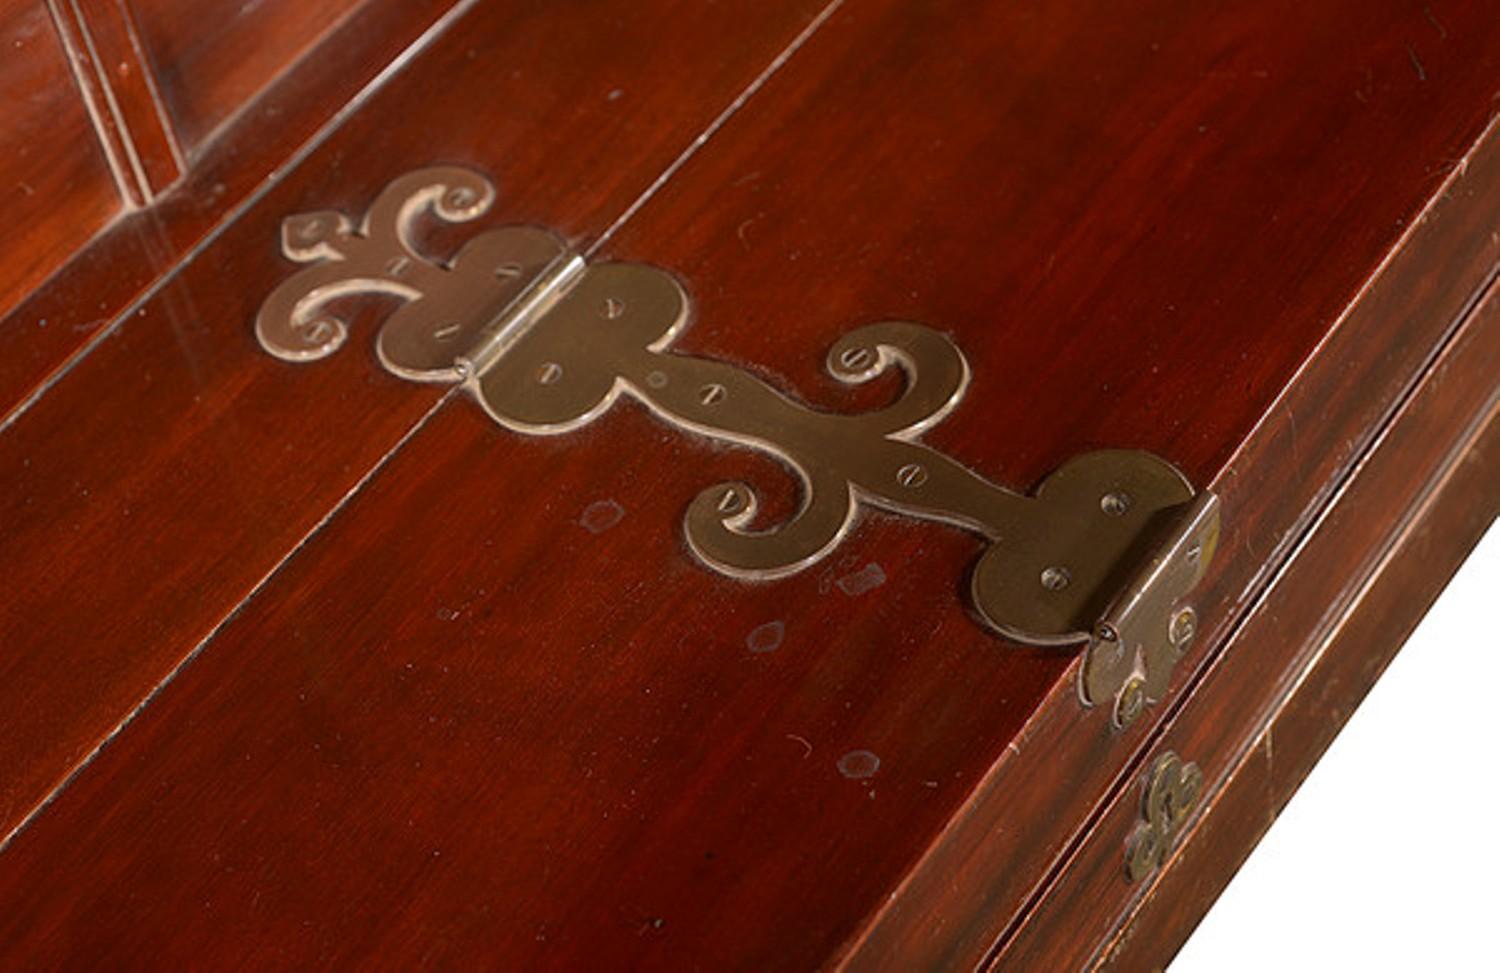 An early 20th century mahogany framed piano manufactured by C. Bechstein.

The brass plate to the lid engraved with blackened letters stating 